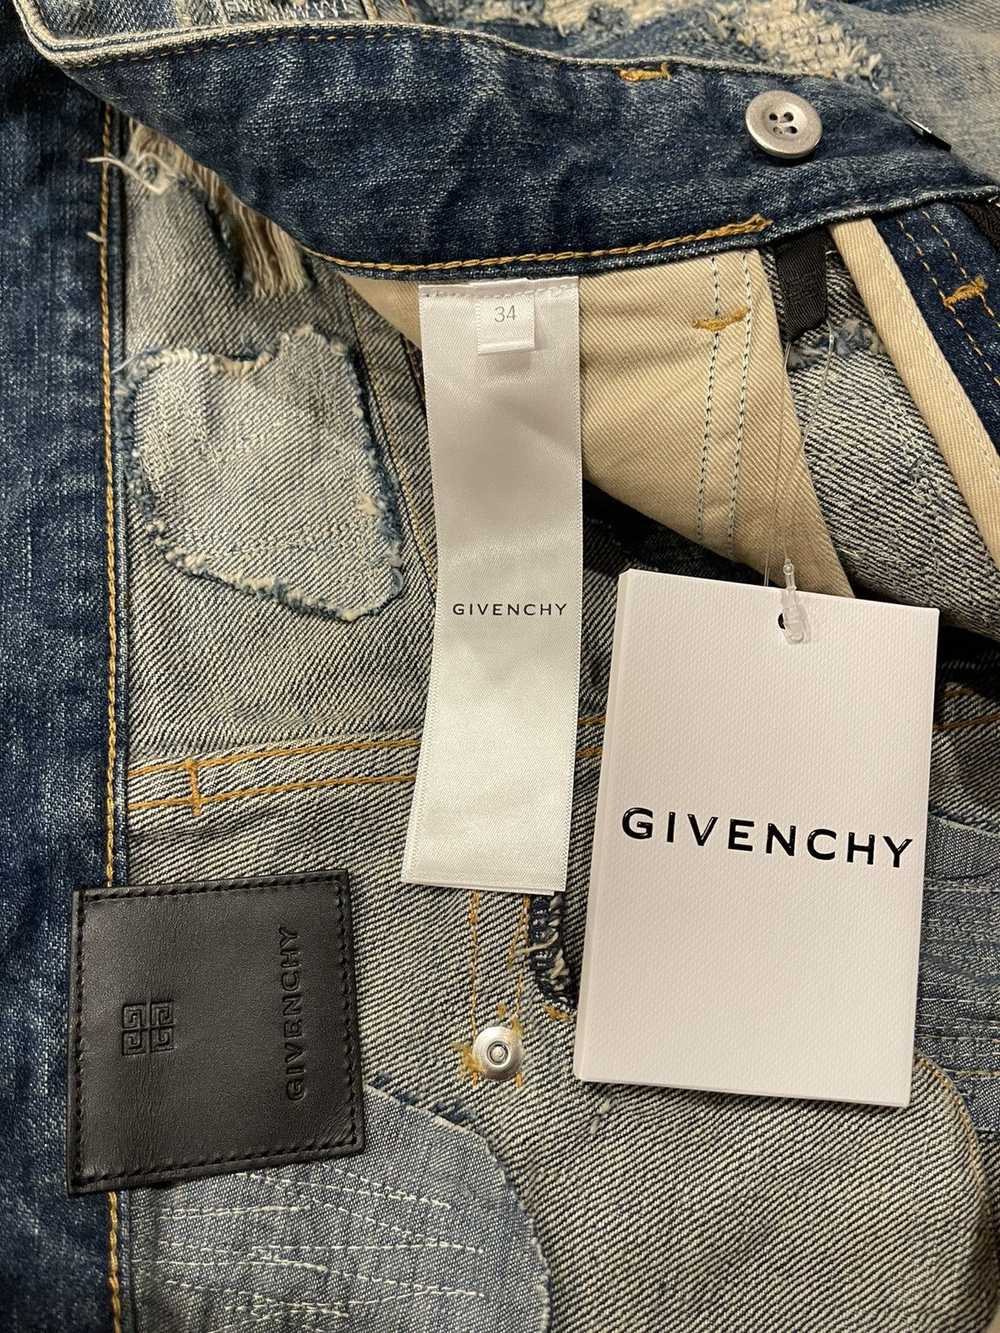 Givenchy Givenchy Matthew Williams Jeans In Destr… - image 10